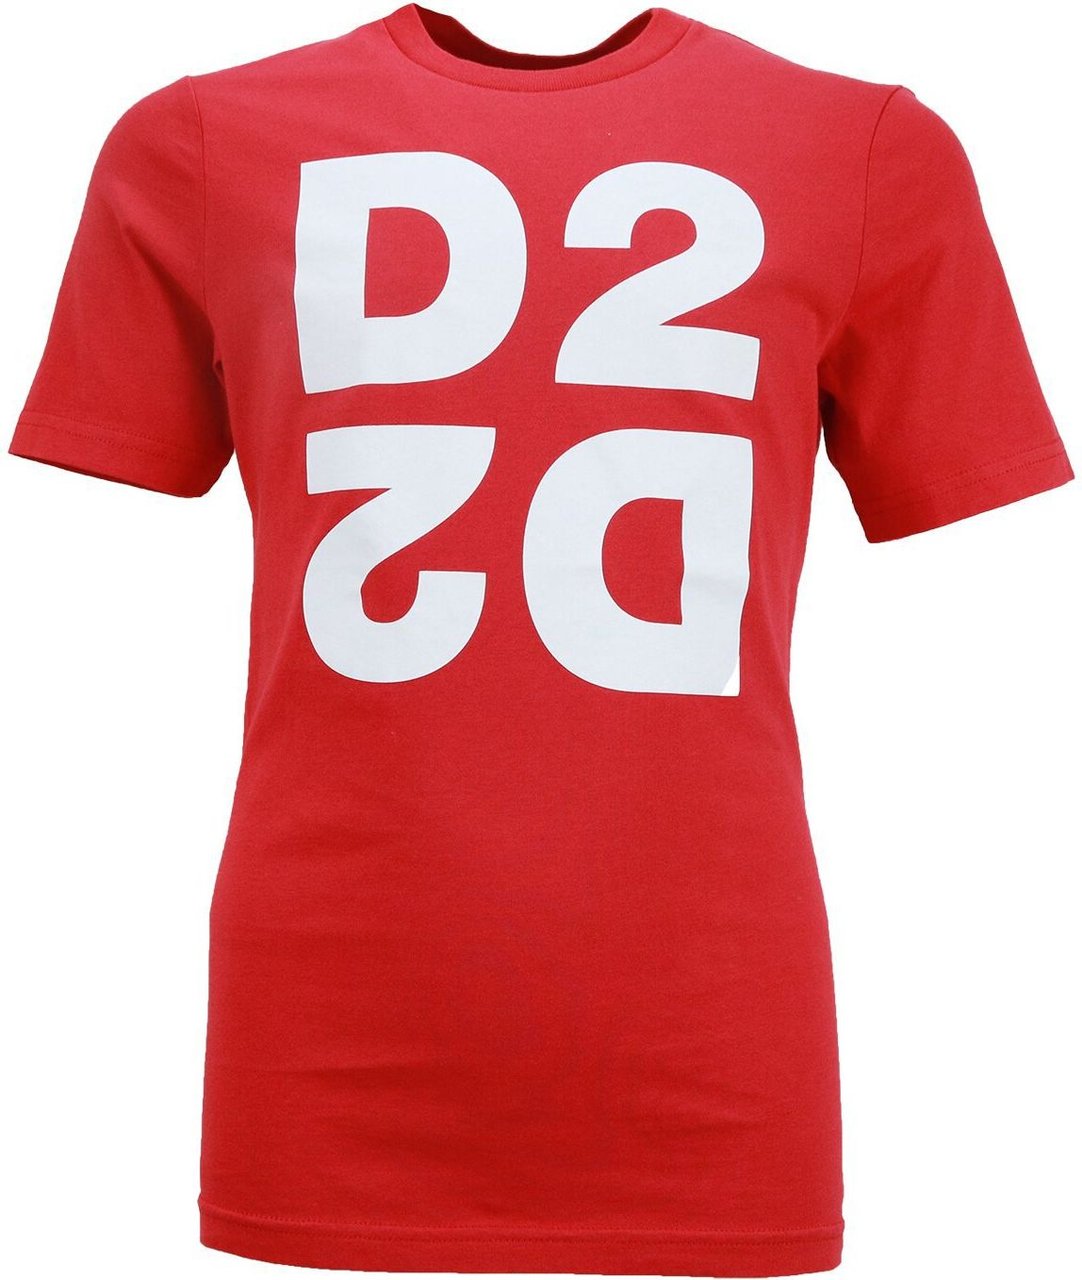 Dsquared2 Shirt Rood D2-2D Rood